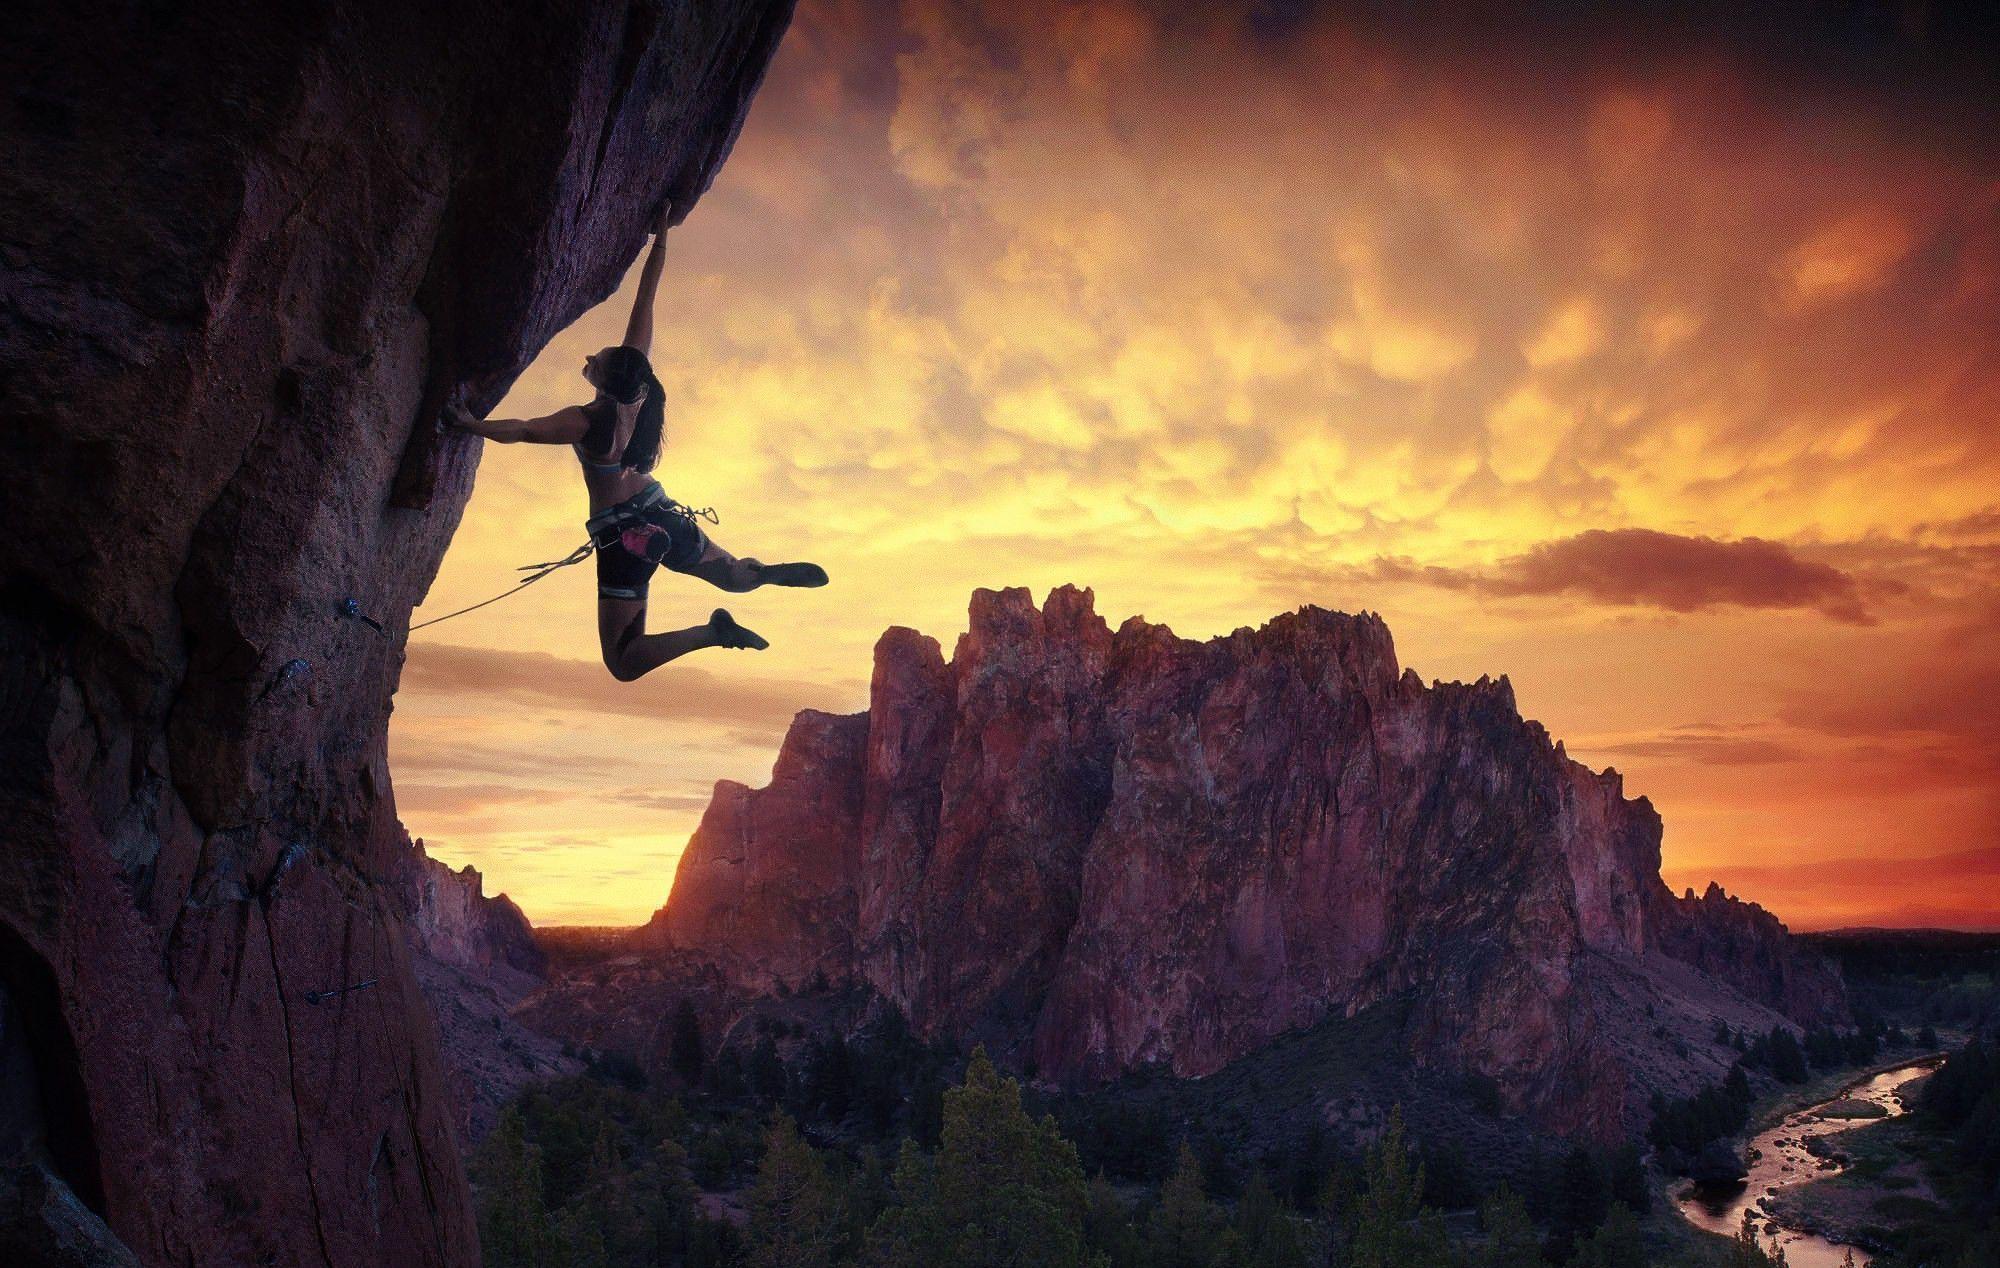 Rock Climbing Background Images HD Pictures and Wallpaper For Free  Download  Pngtree